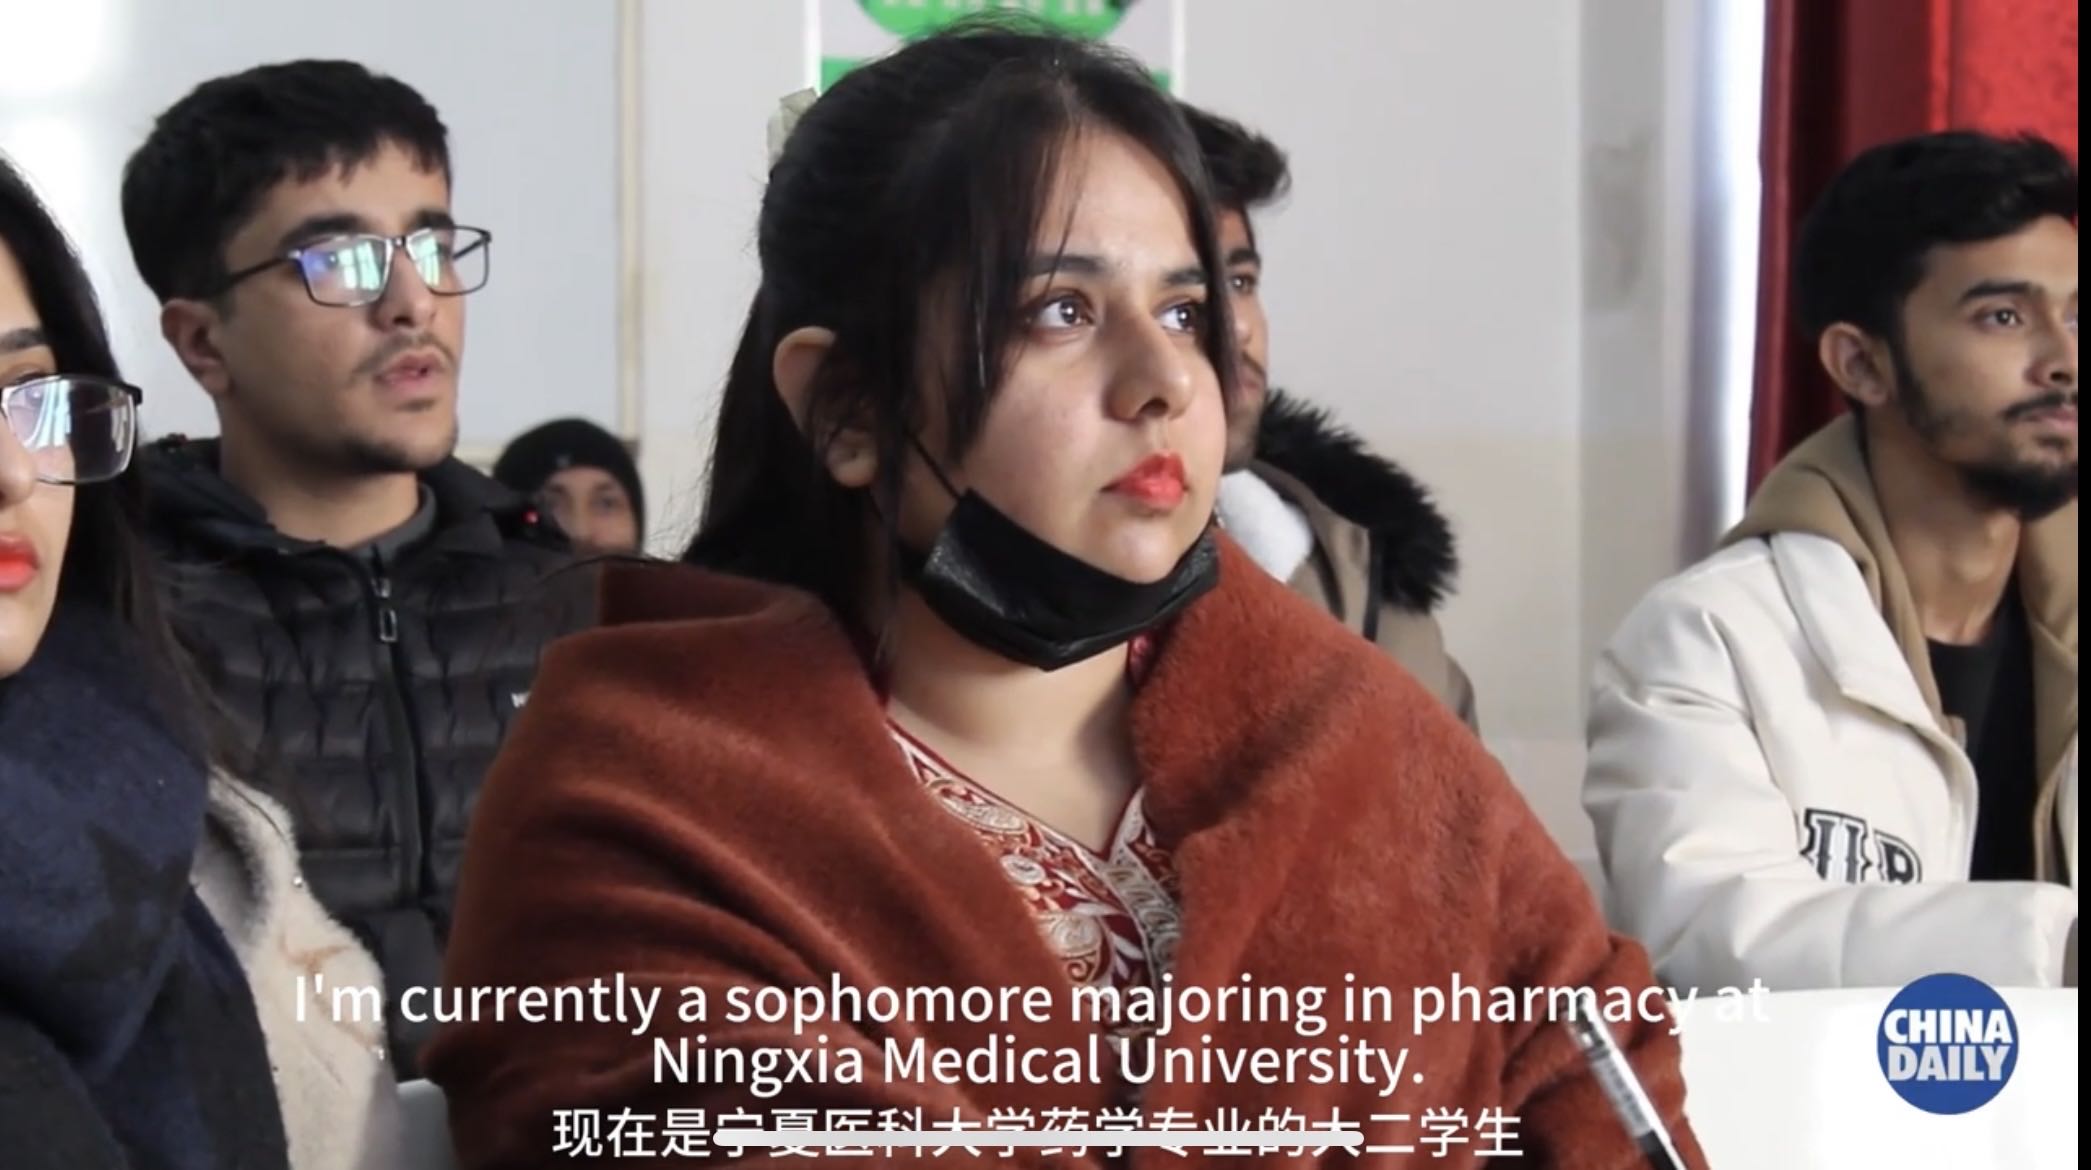 Pakistan student finds new home at Ningxia Medical University